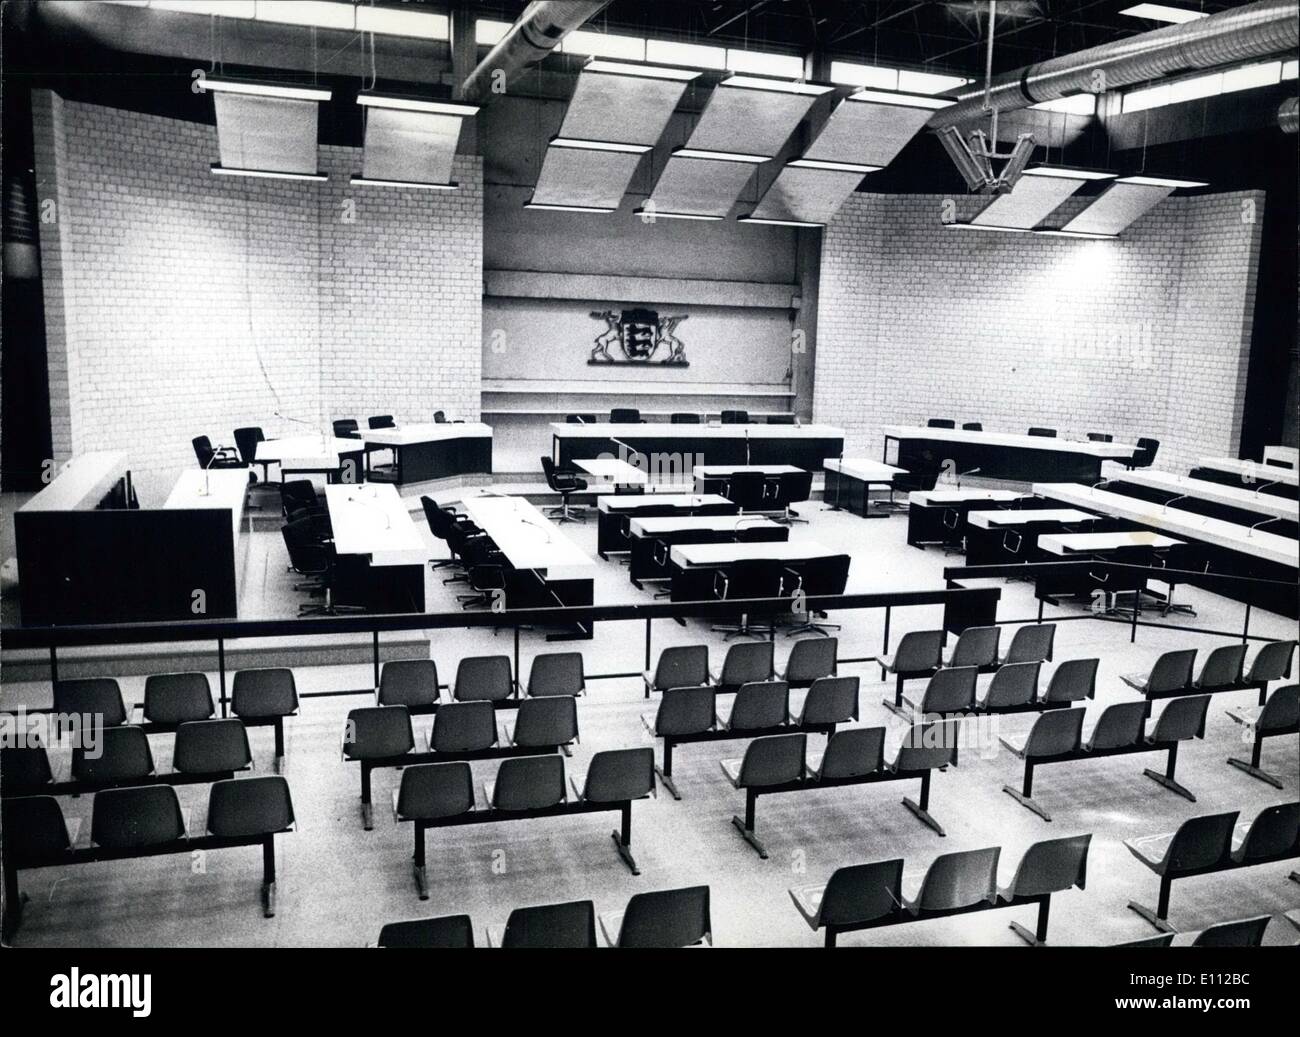 May 05, 1975 - May 21ST: Start of Trial Against Leading Members of Baader/Meinhof Group in Stuttgart On May 21st 1975, the proceedings against leading members of the Baader/Meinhof group will start in Stuttgart. About 500 witnesses and expert witnesses will be heard during this trial which will take between 6 and 18 months Stock Photo